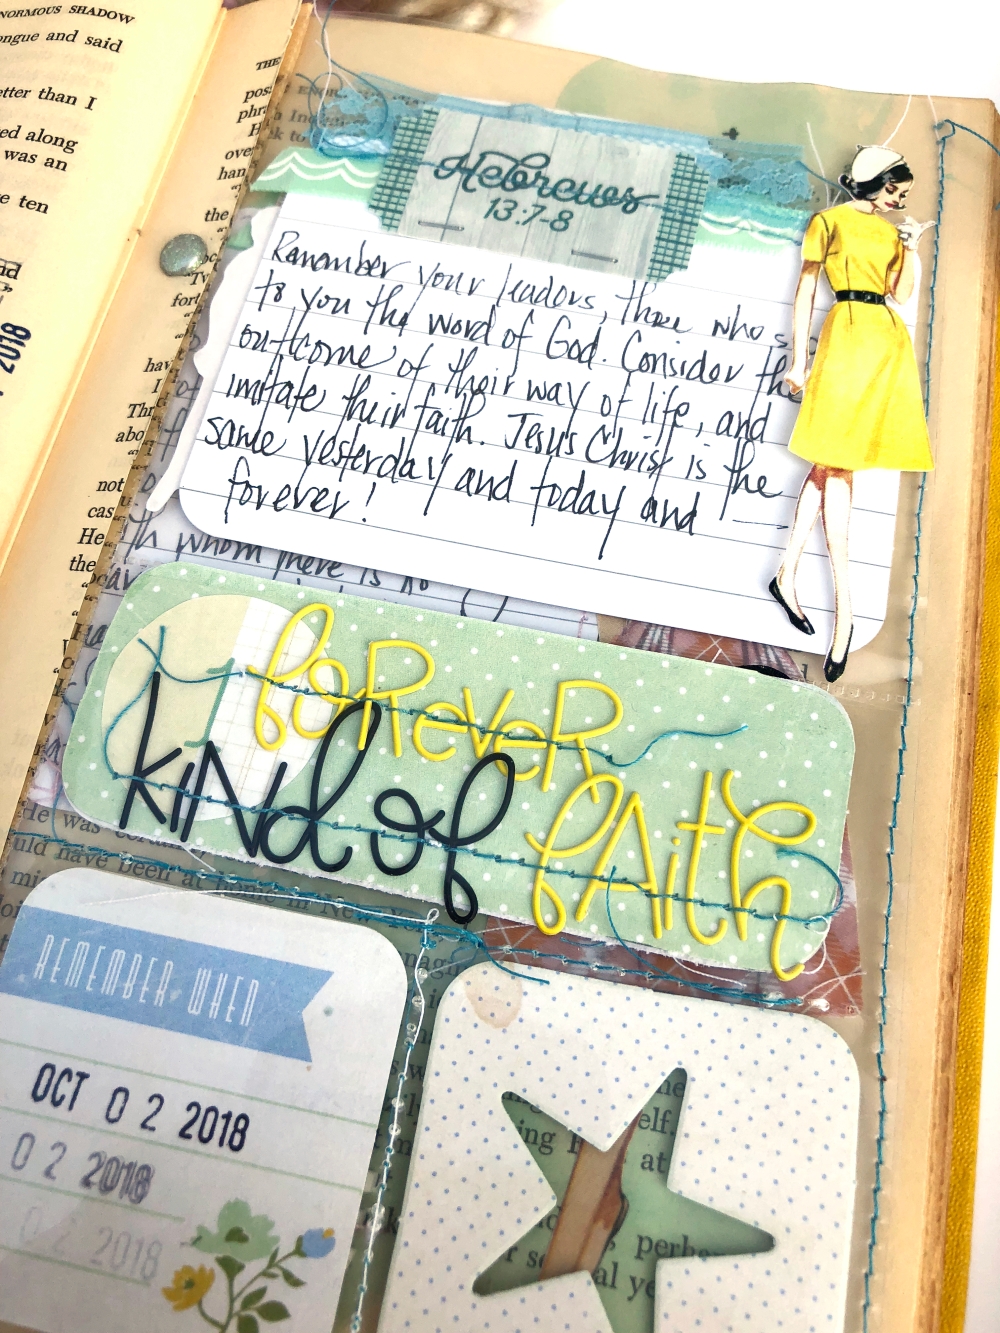 Lydia_TheLittleThings_AlteredBook_10.2